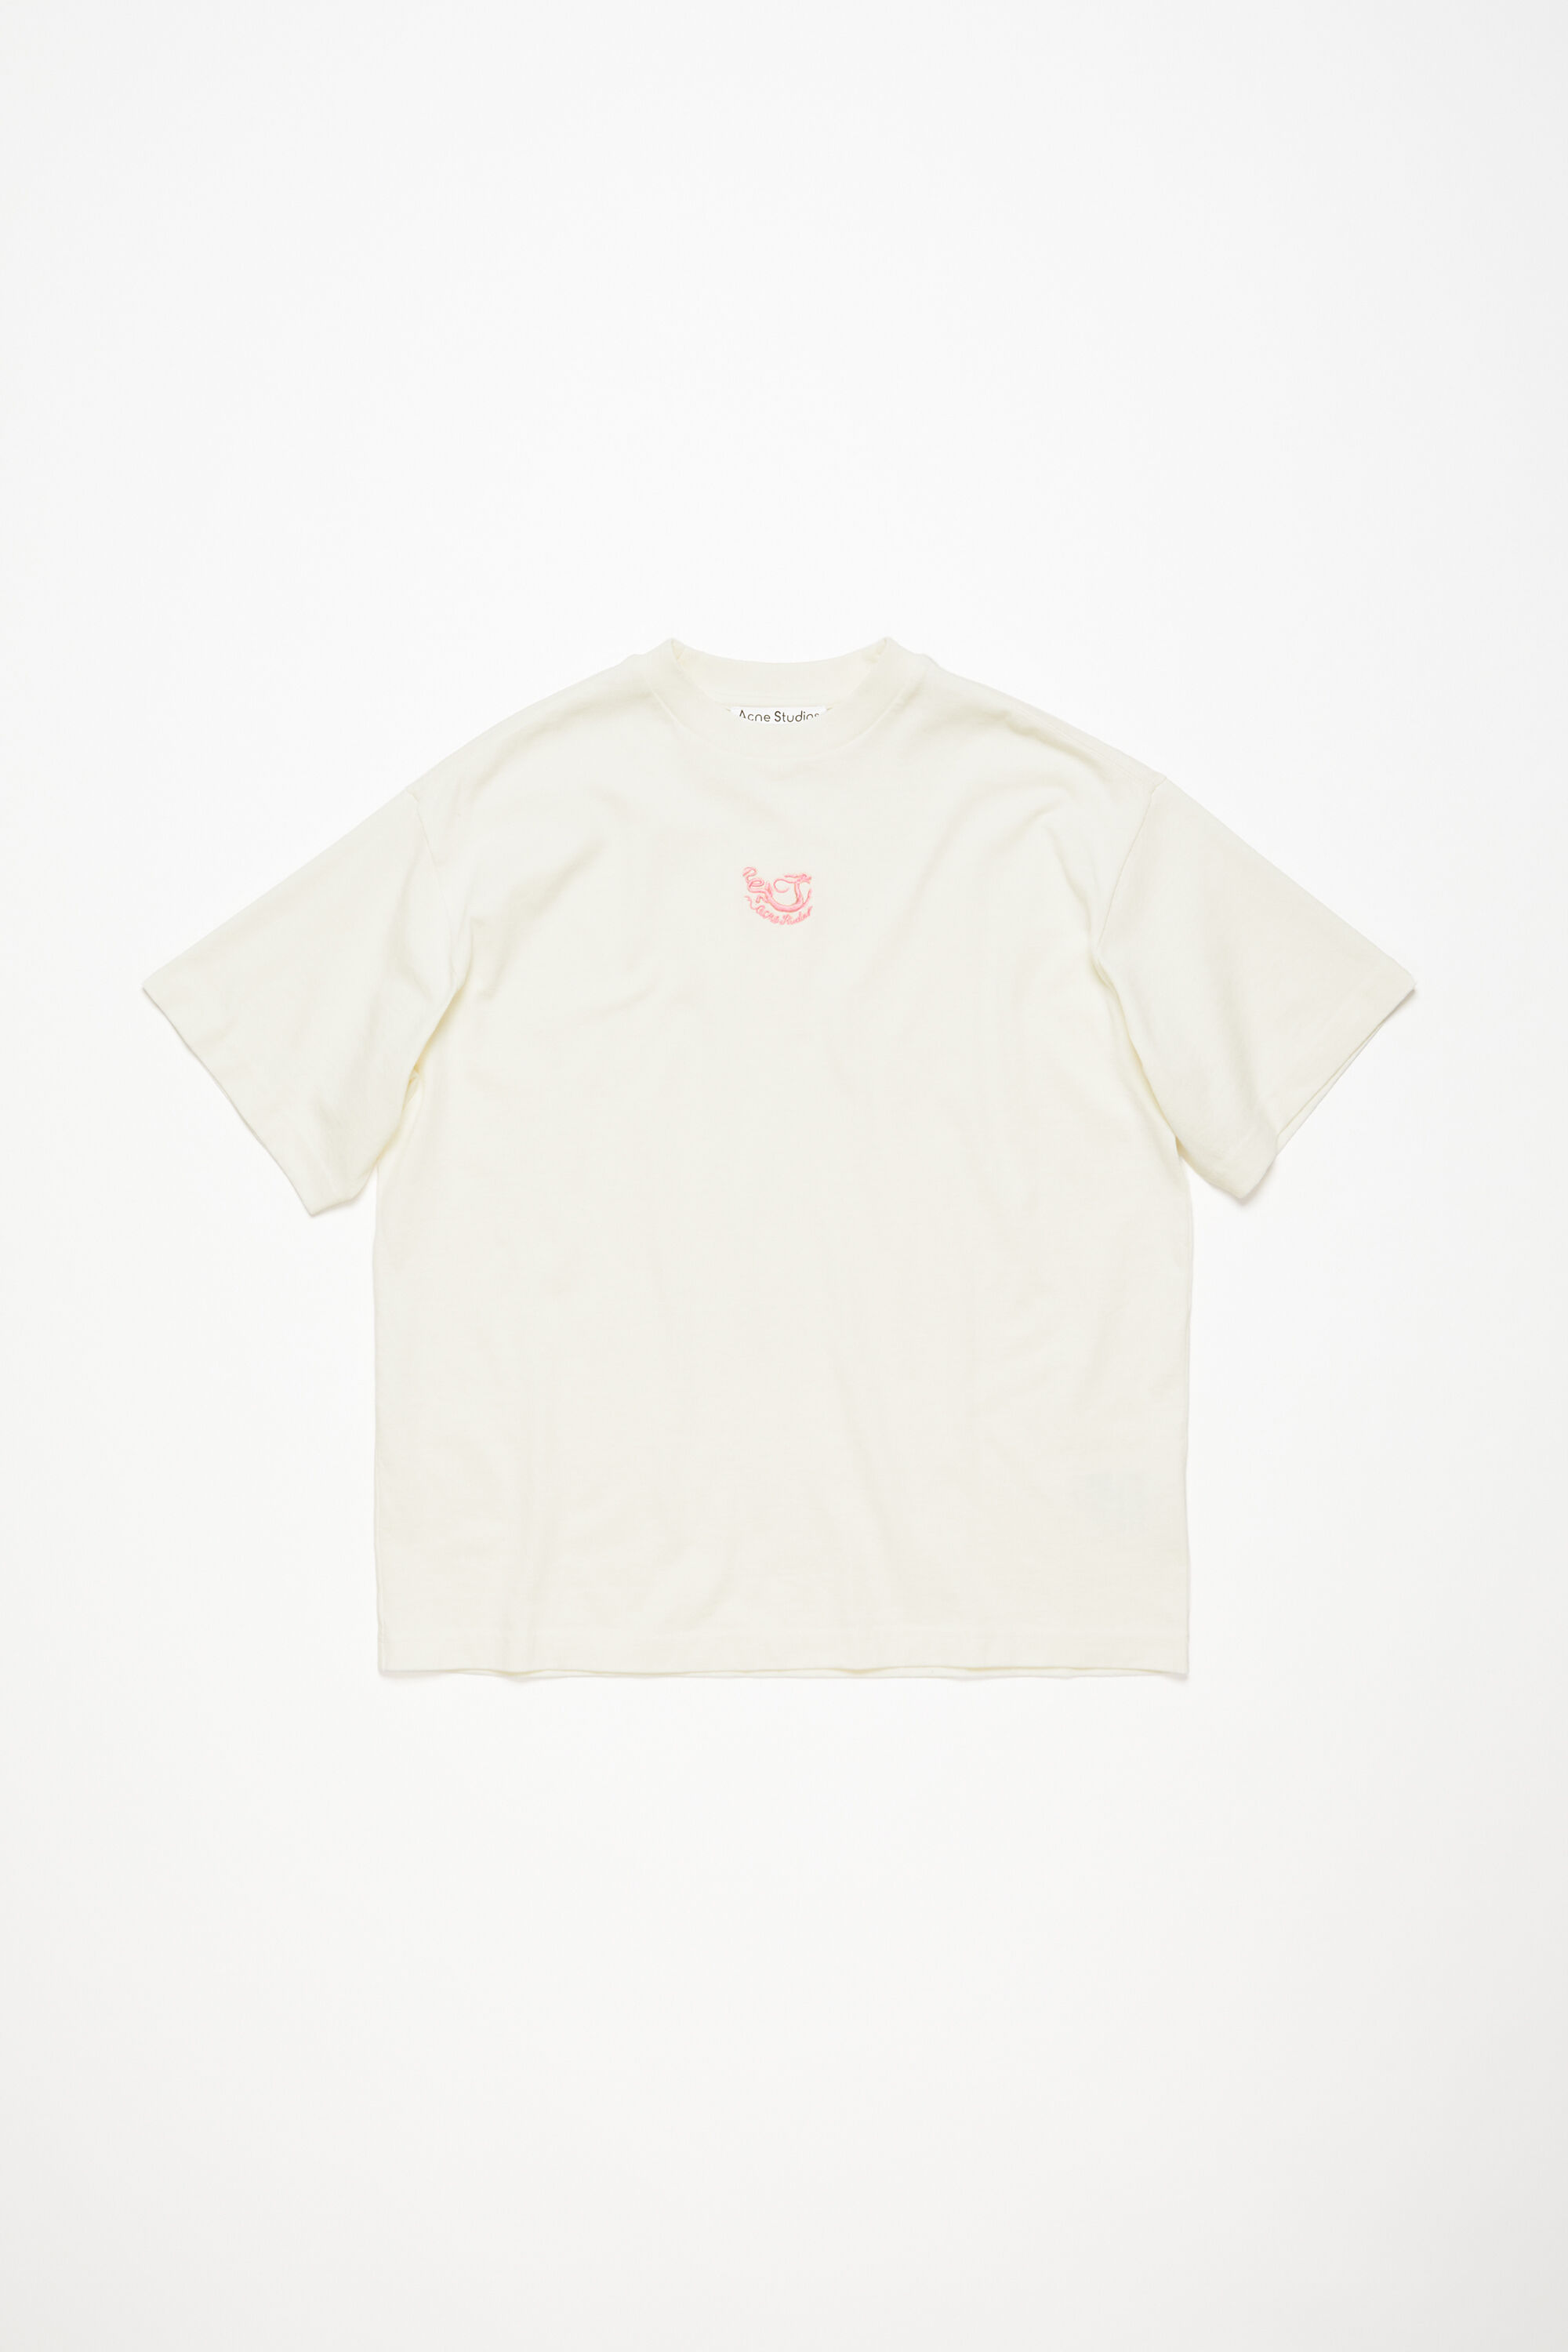 Acne Studios - Embroidery t-shirt - Relaxed fit - Off white